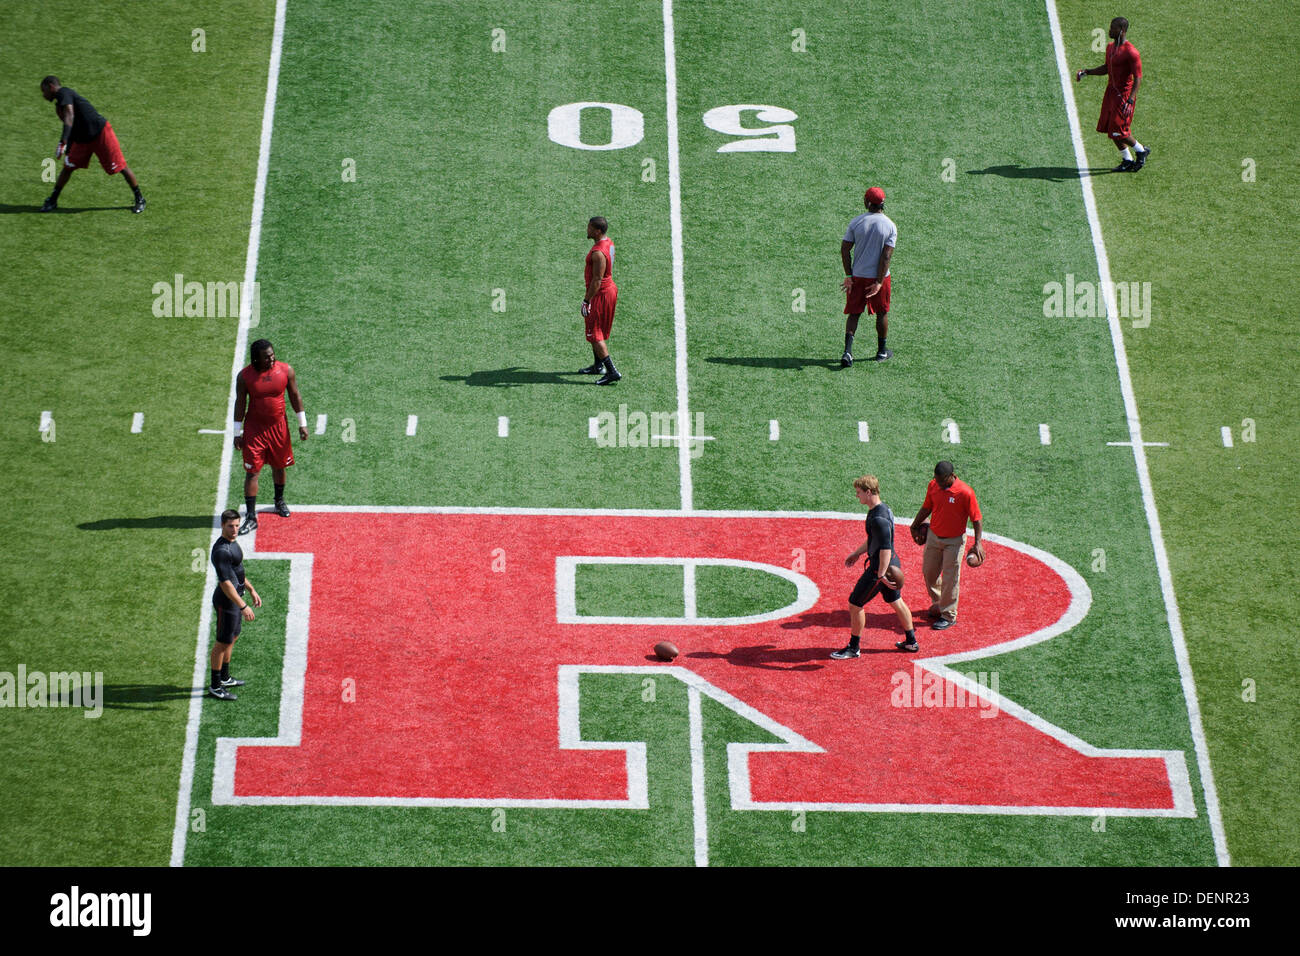 Piscataway, New Jersey, USA. 21st Sep, 2013. September 21, 2013: Members of the Rutgers Scarlet Knights warm up prior to the game between Arkansas Razorbacks and Rutgers Scarlet Knights at Highpoint Solutions Stadium in Piscataway, NJ. © csm/Alamy Live News Stock Photo